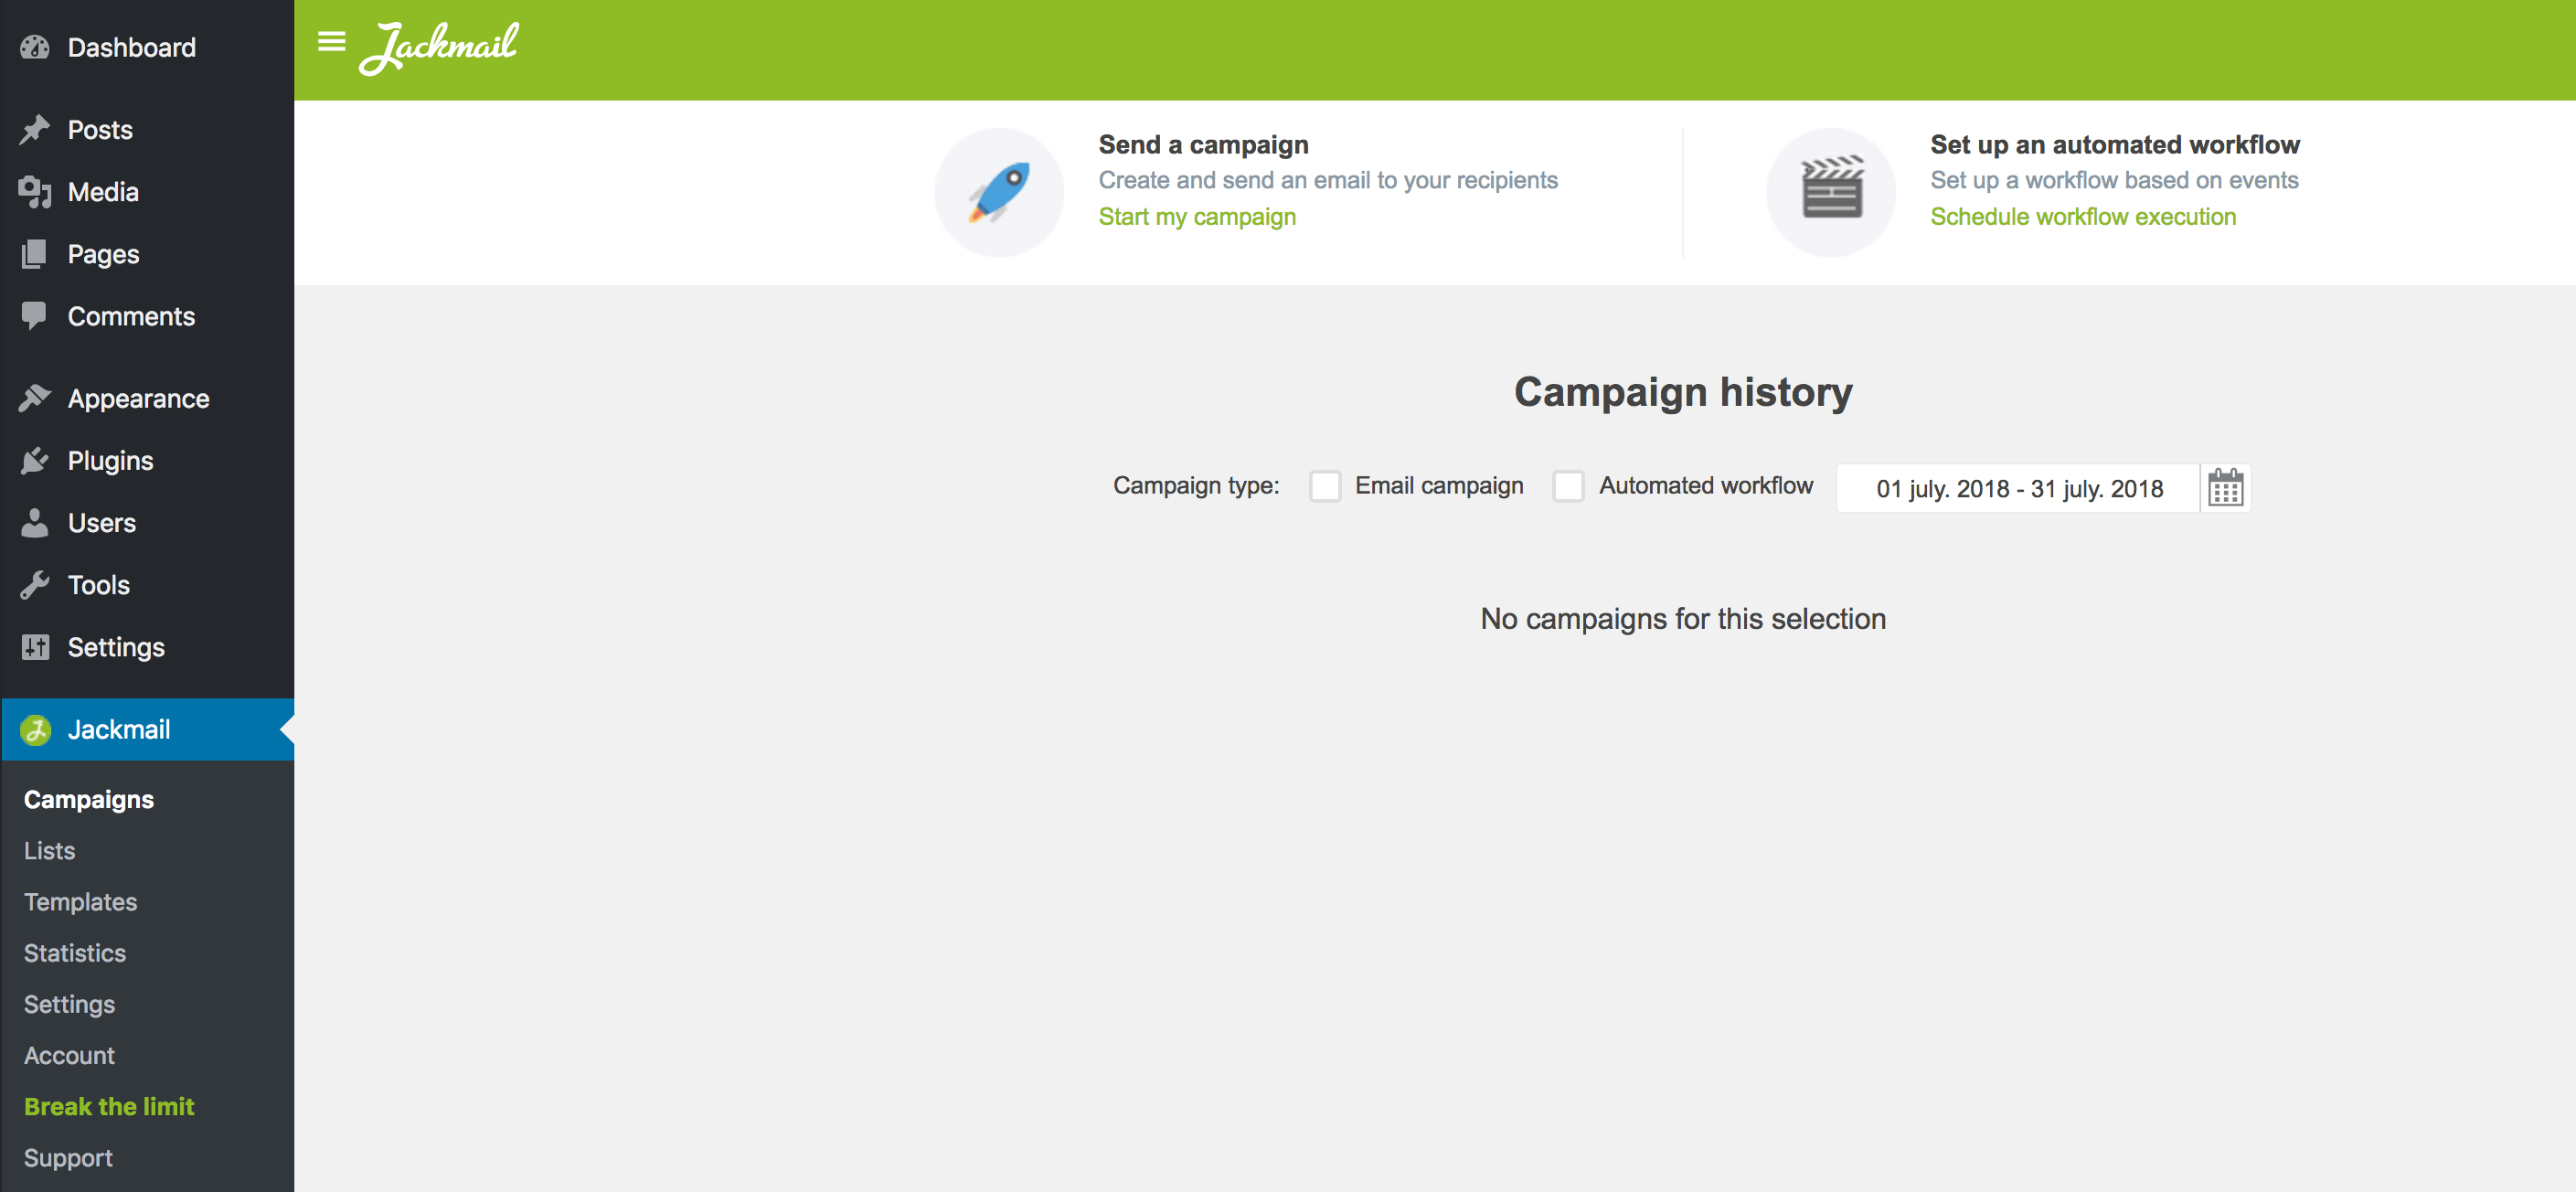 Viewing the campaigns in Jackmail.